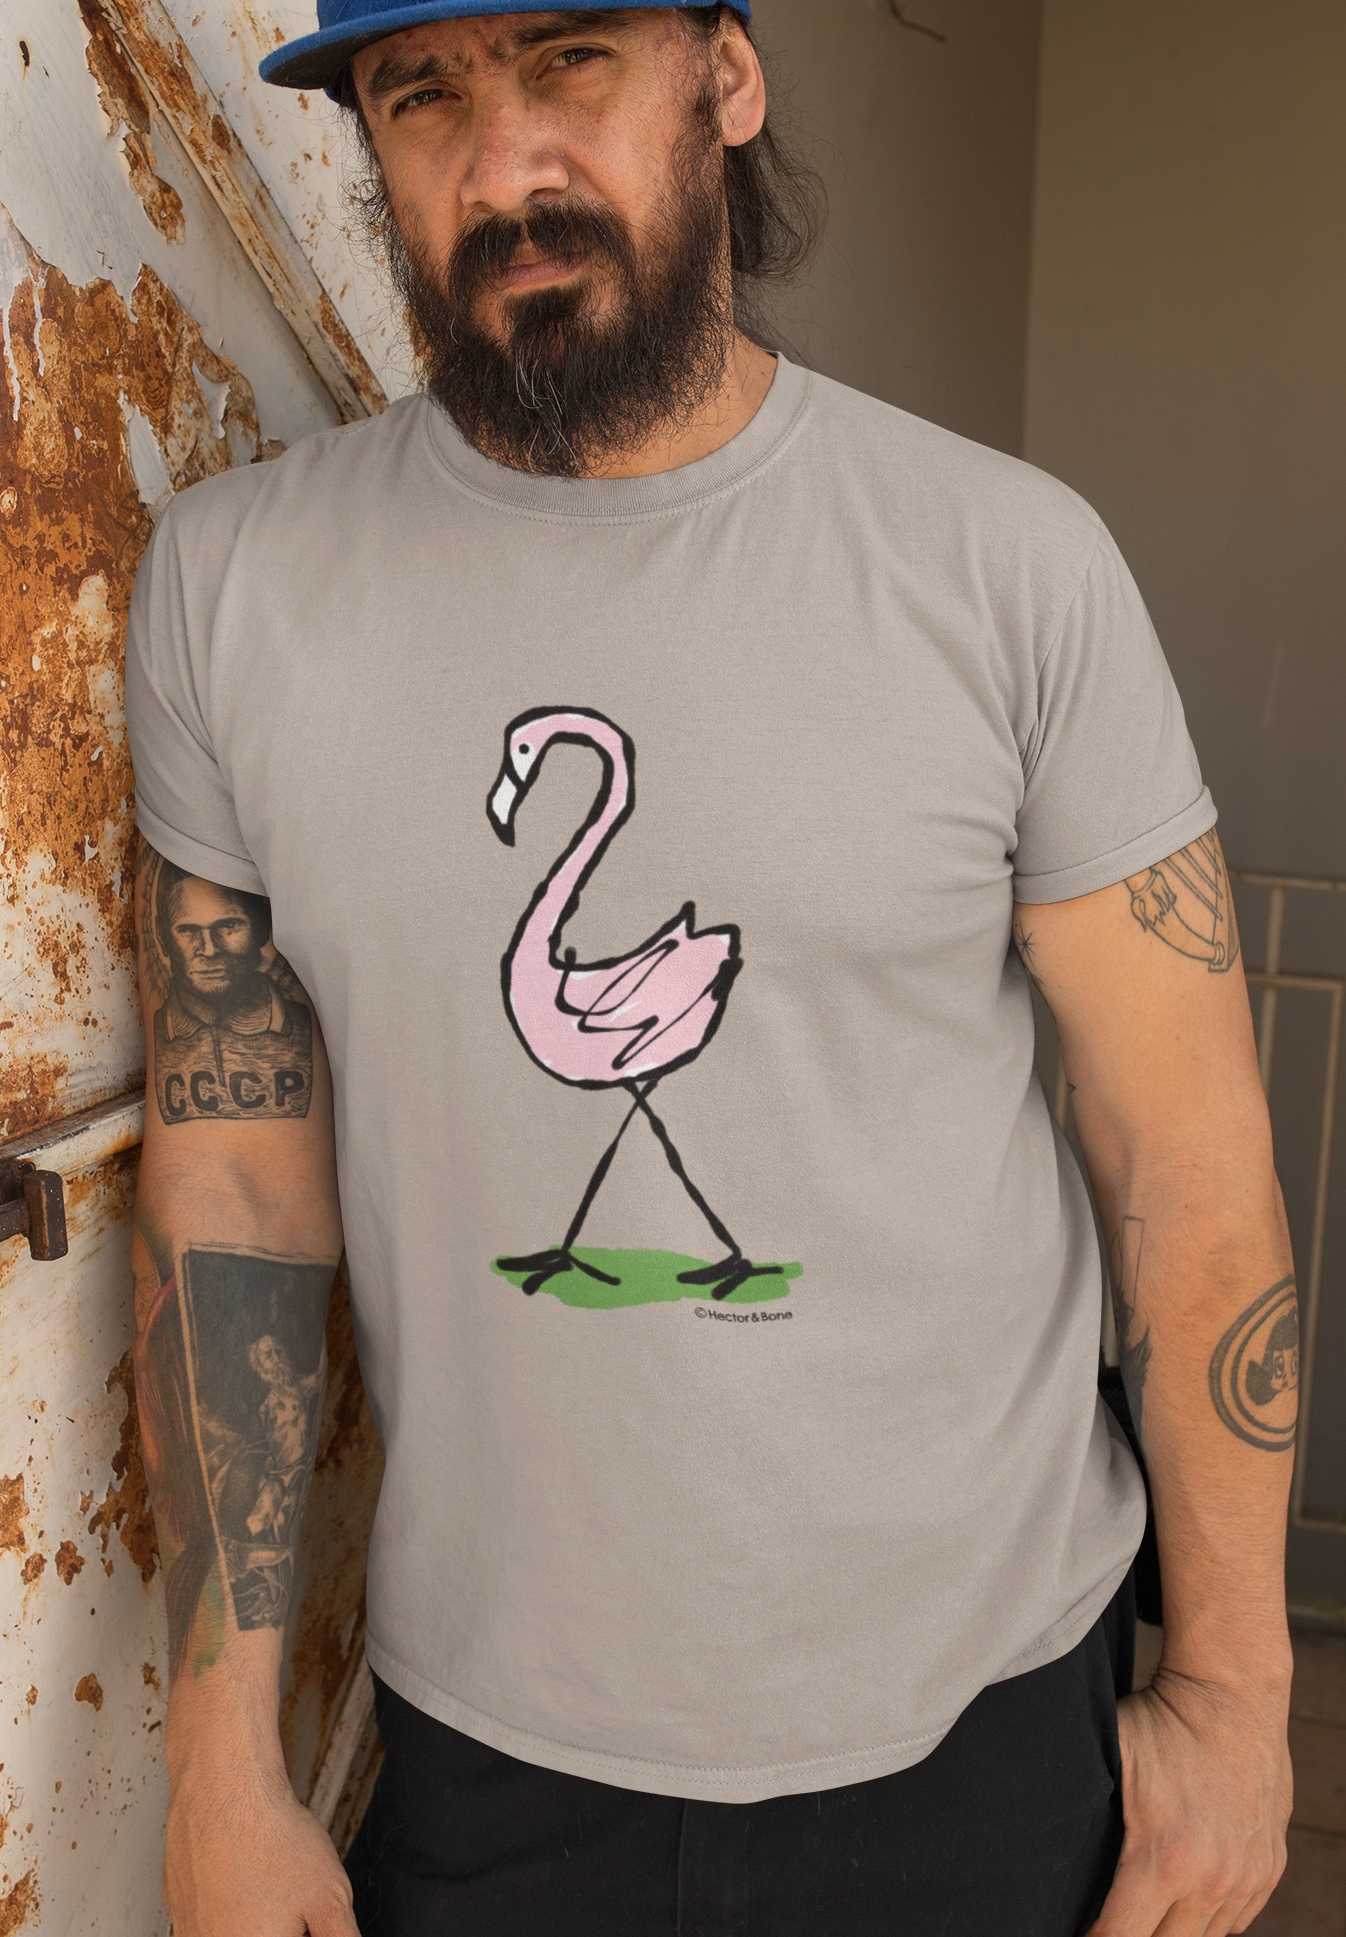 Pink Flamingo T-shirt - Man wearing an illustrated flamingo t-shirt design on sand tee by Hector and Bone